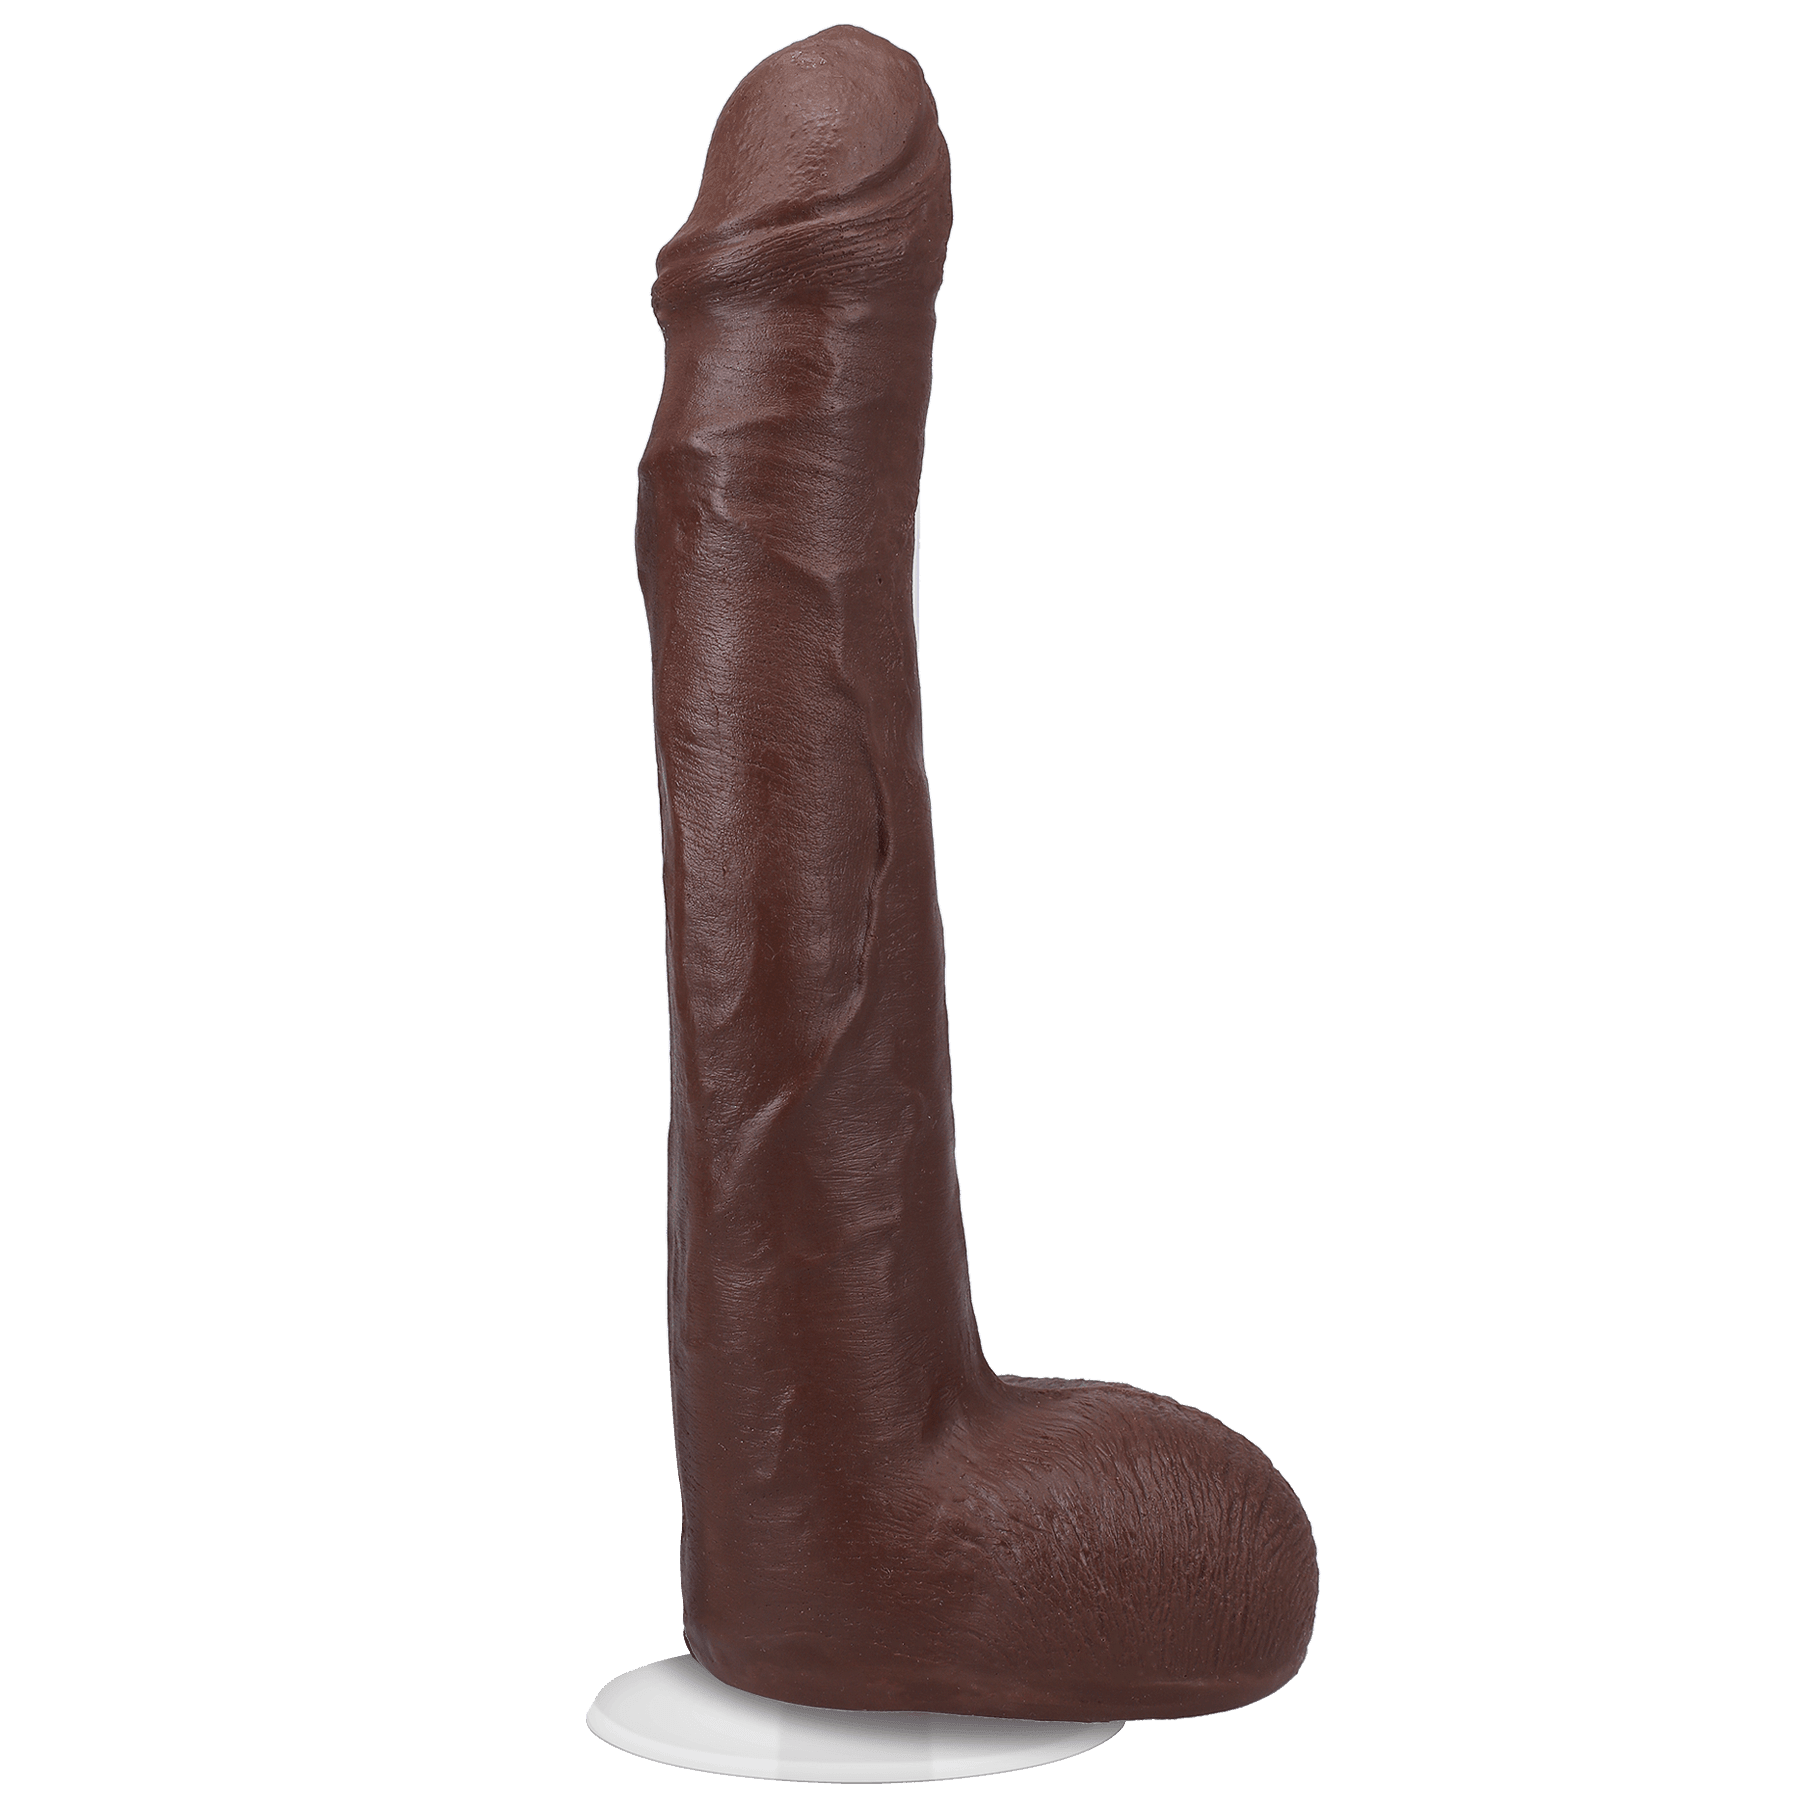 Doc Johnson Signature Cock Anton Harden 11in Dildo - Buy At Luxury Toy X - Free 3-Day Shipping